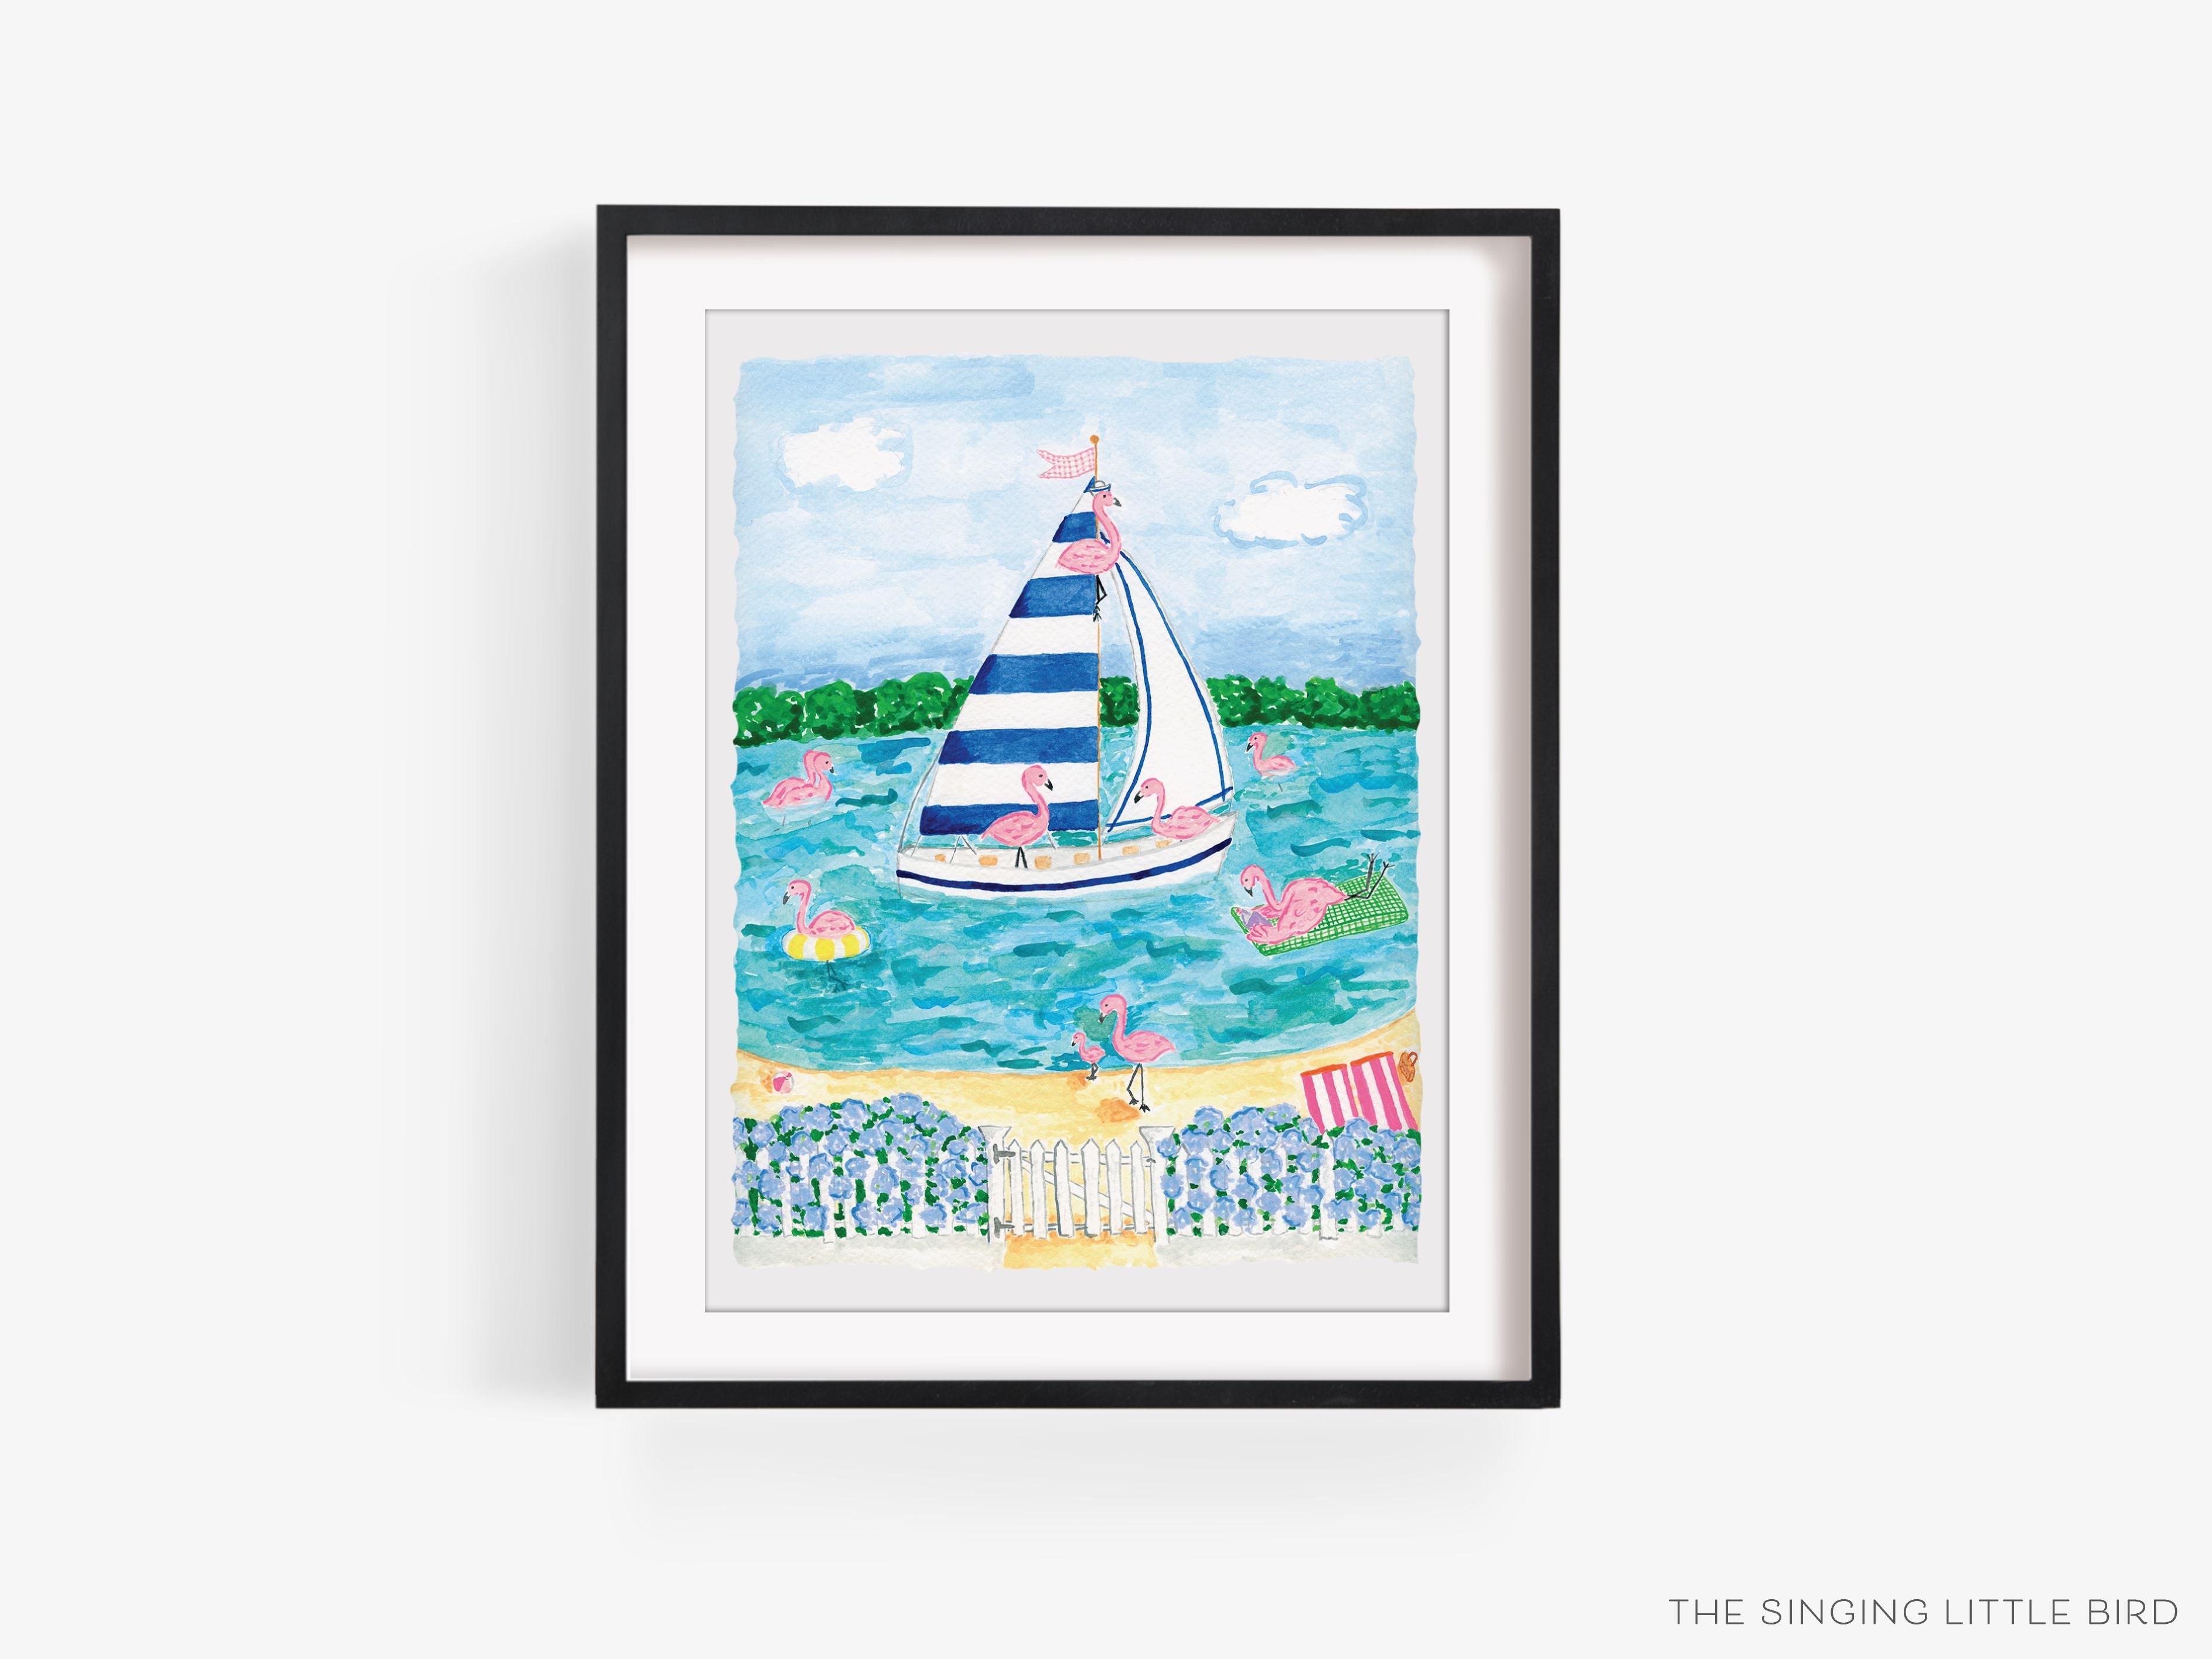 Flamingo Lake Art Print-This watercolor art print features our hand-painted Flamingo Lake Scene, printed in the USA on 120lb high quality art paper. This makes a great gift or wall decor for the shore lover in your life.-The Singing Little Bird